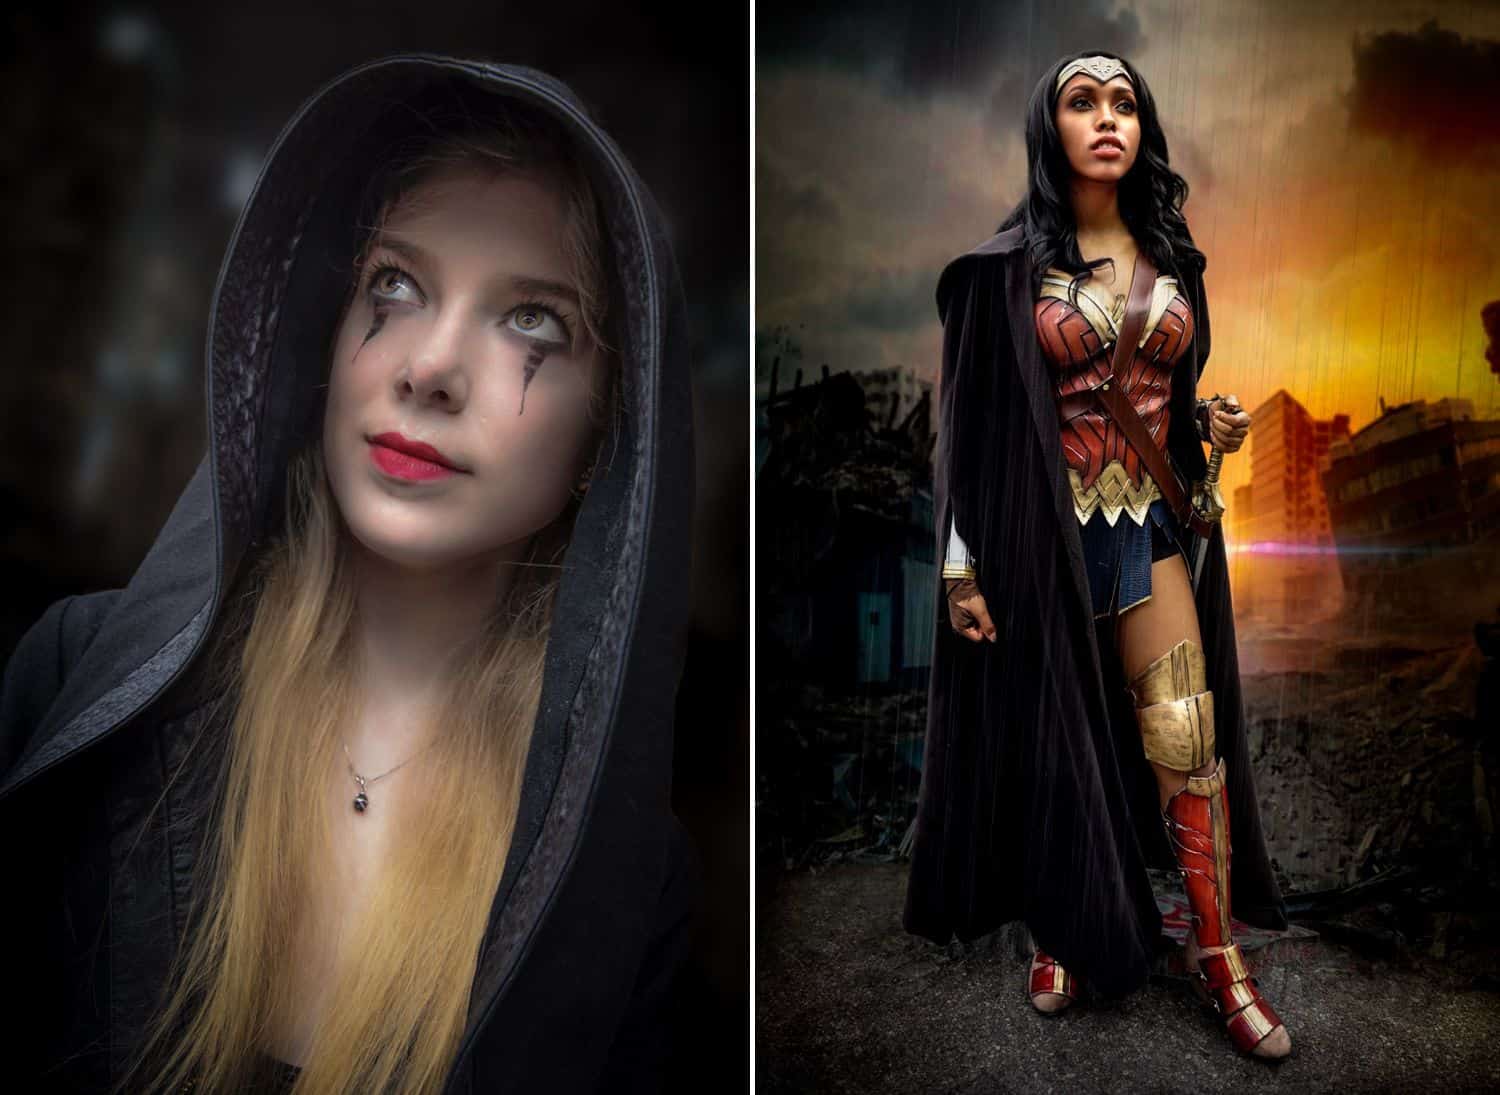 41 Fascinating Photos That Will Inspire More Powerful Portraits: Cosplay Photography by Joe Alfano